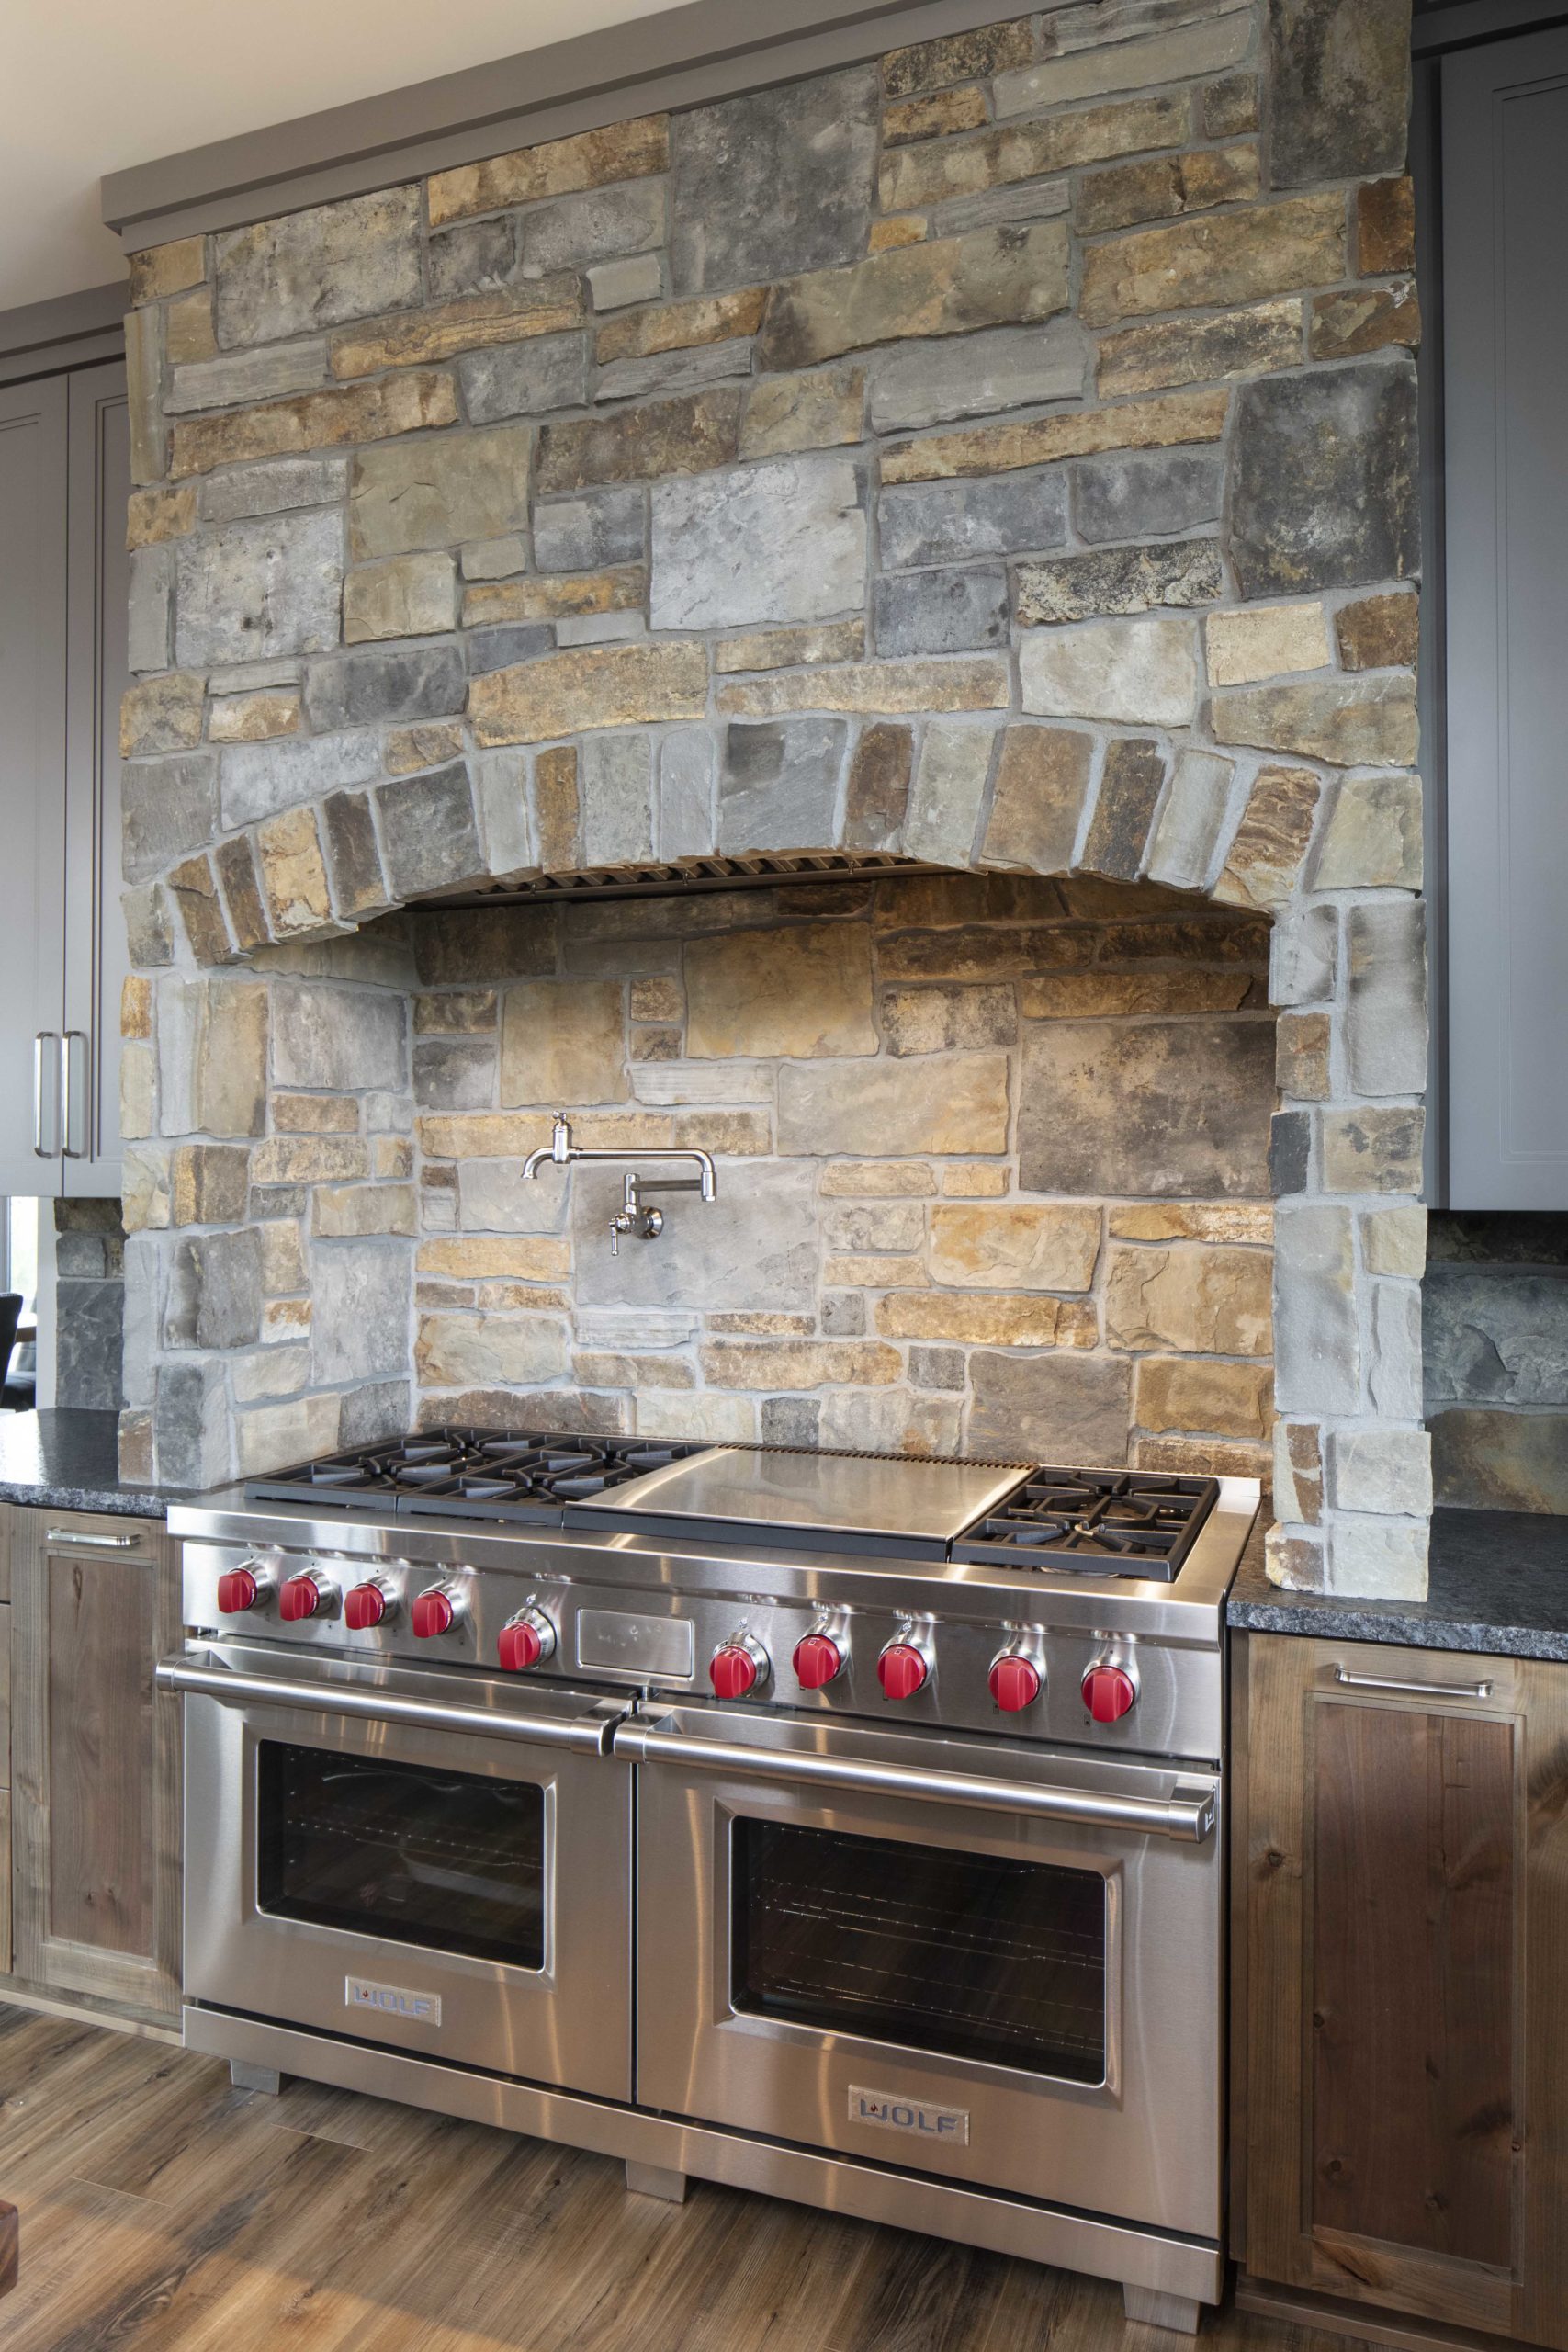 A kitchen with a stone wall and stainless steel appliances.